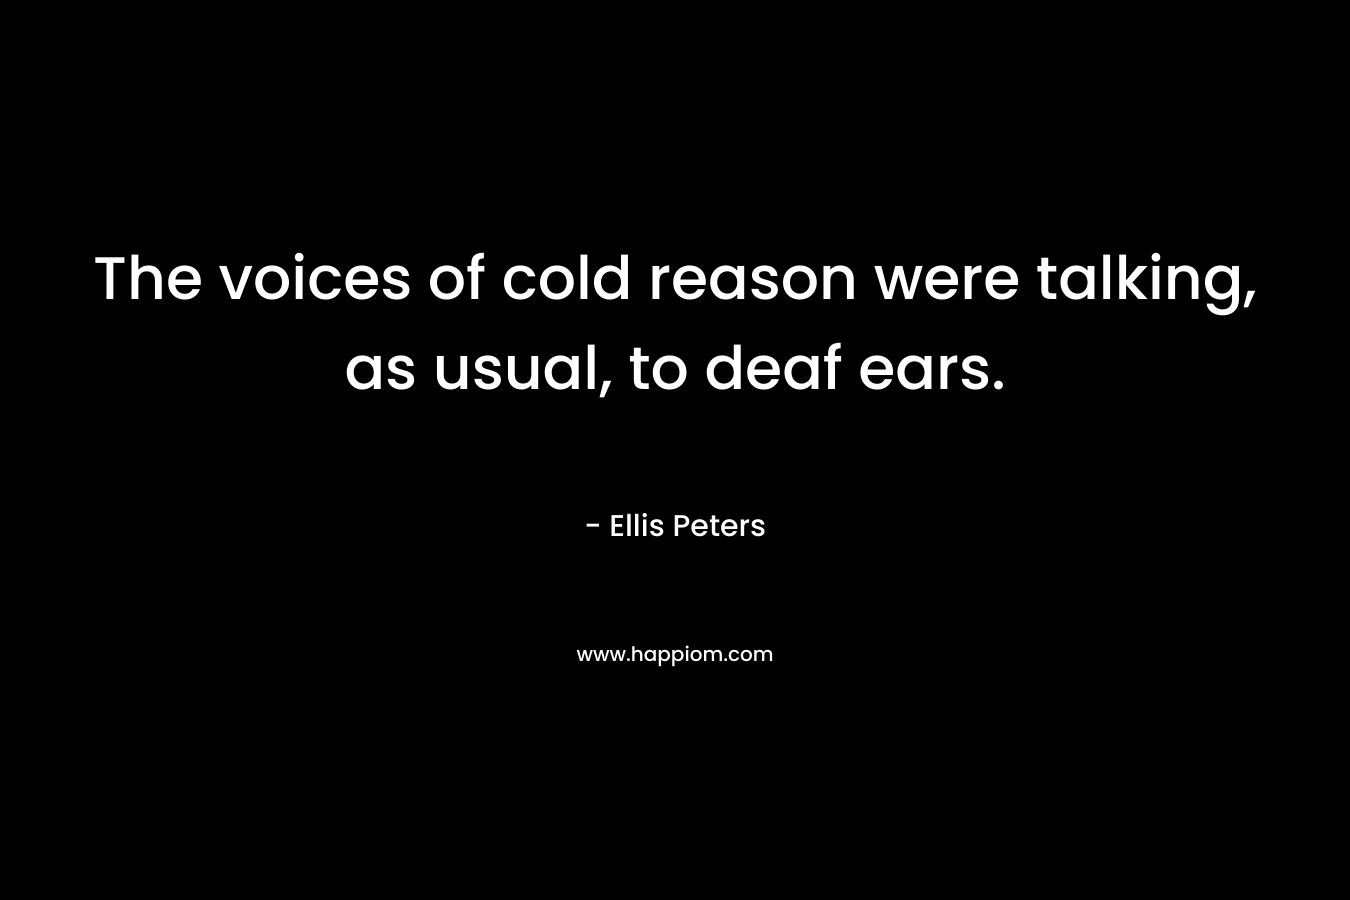 The voices of cold reason were talking, as usual, to deaf ears.